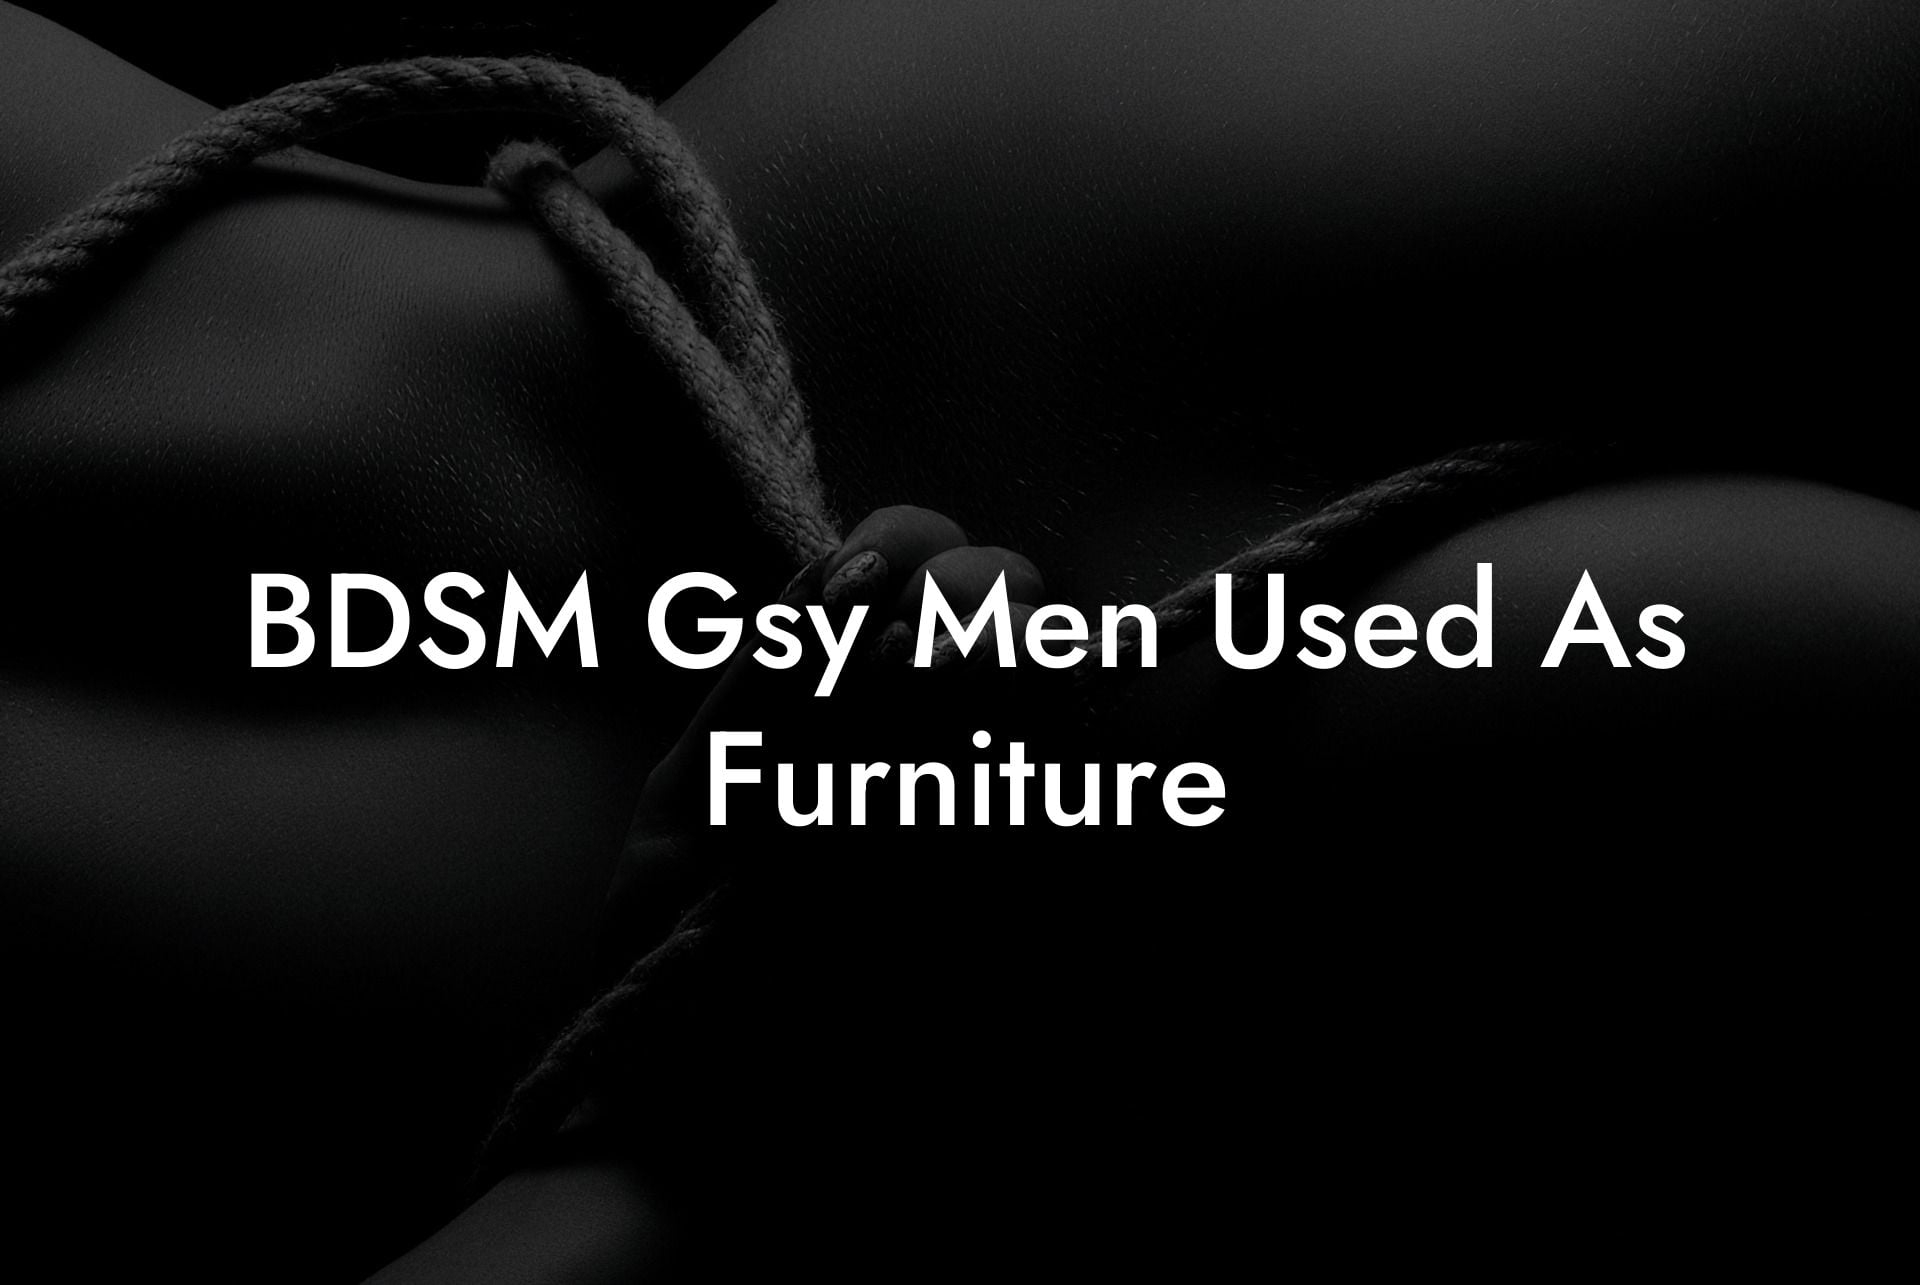 BDSM Gsy Men Used As Furniture